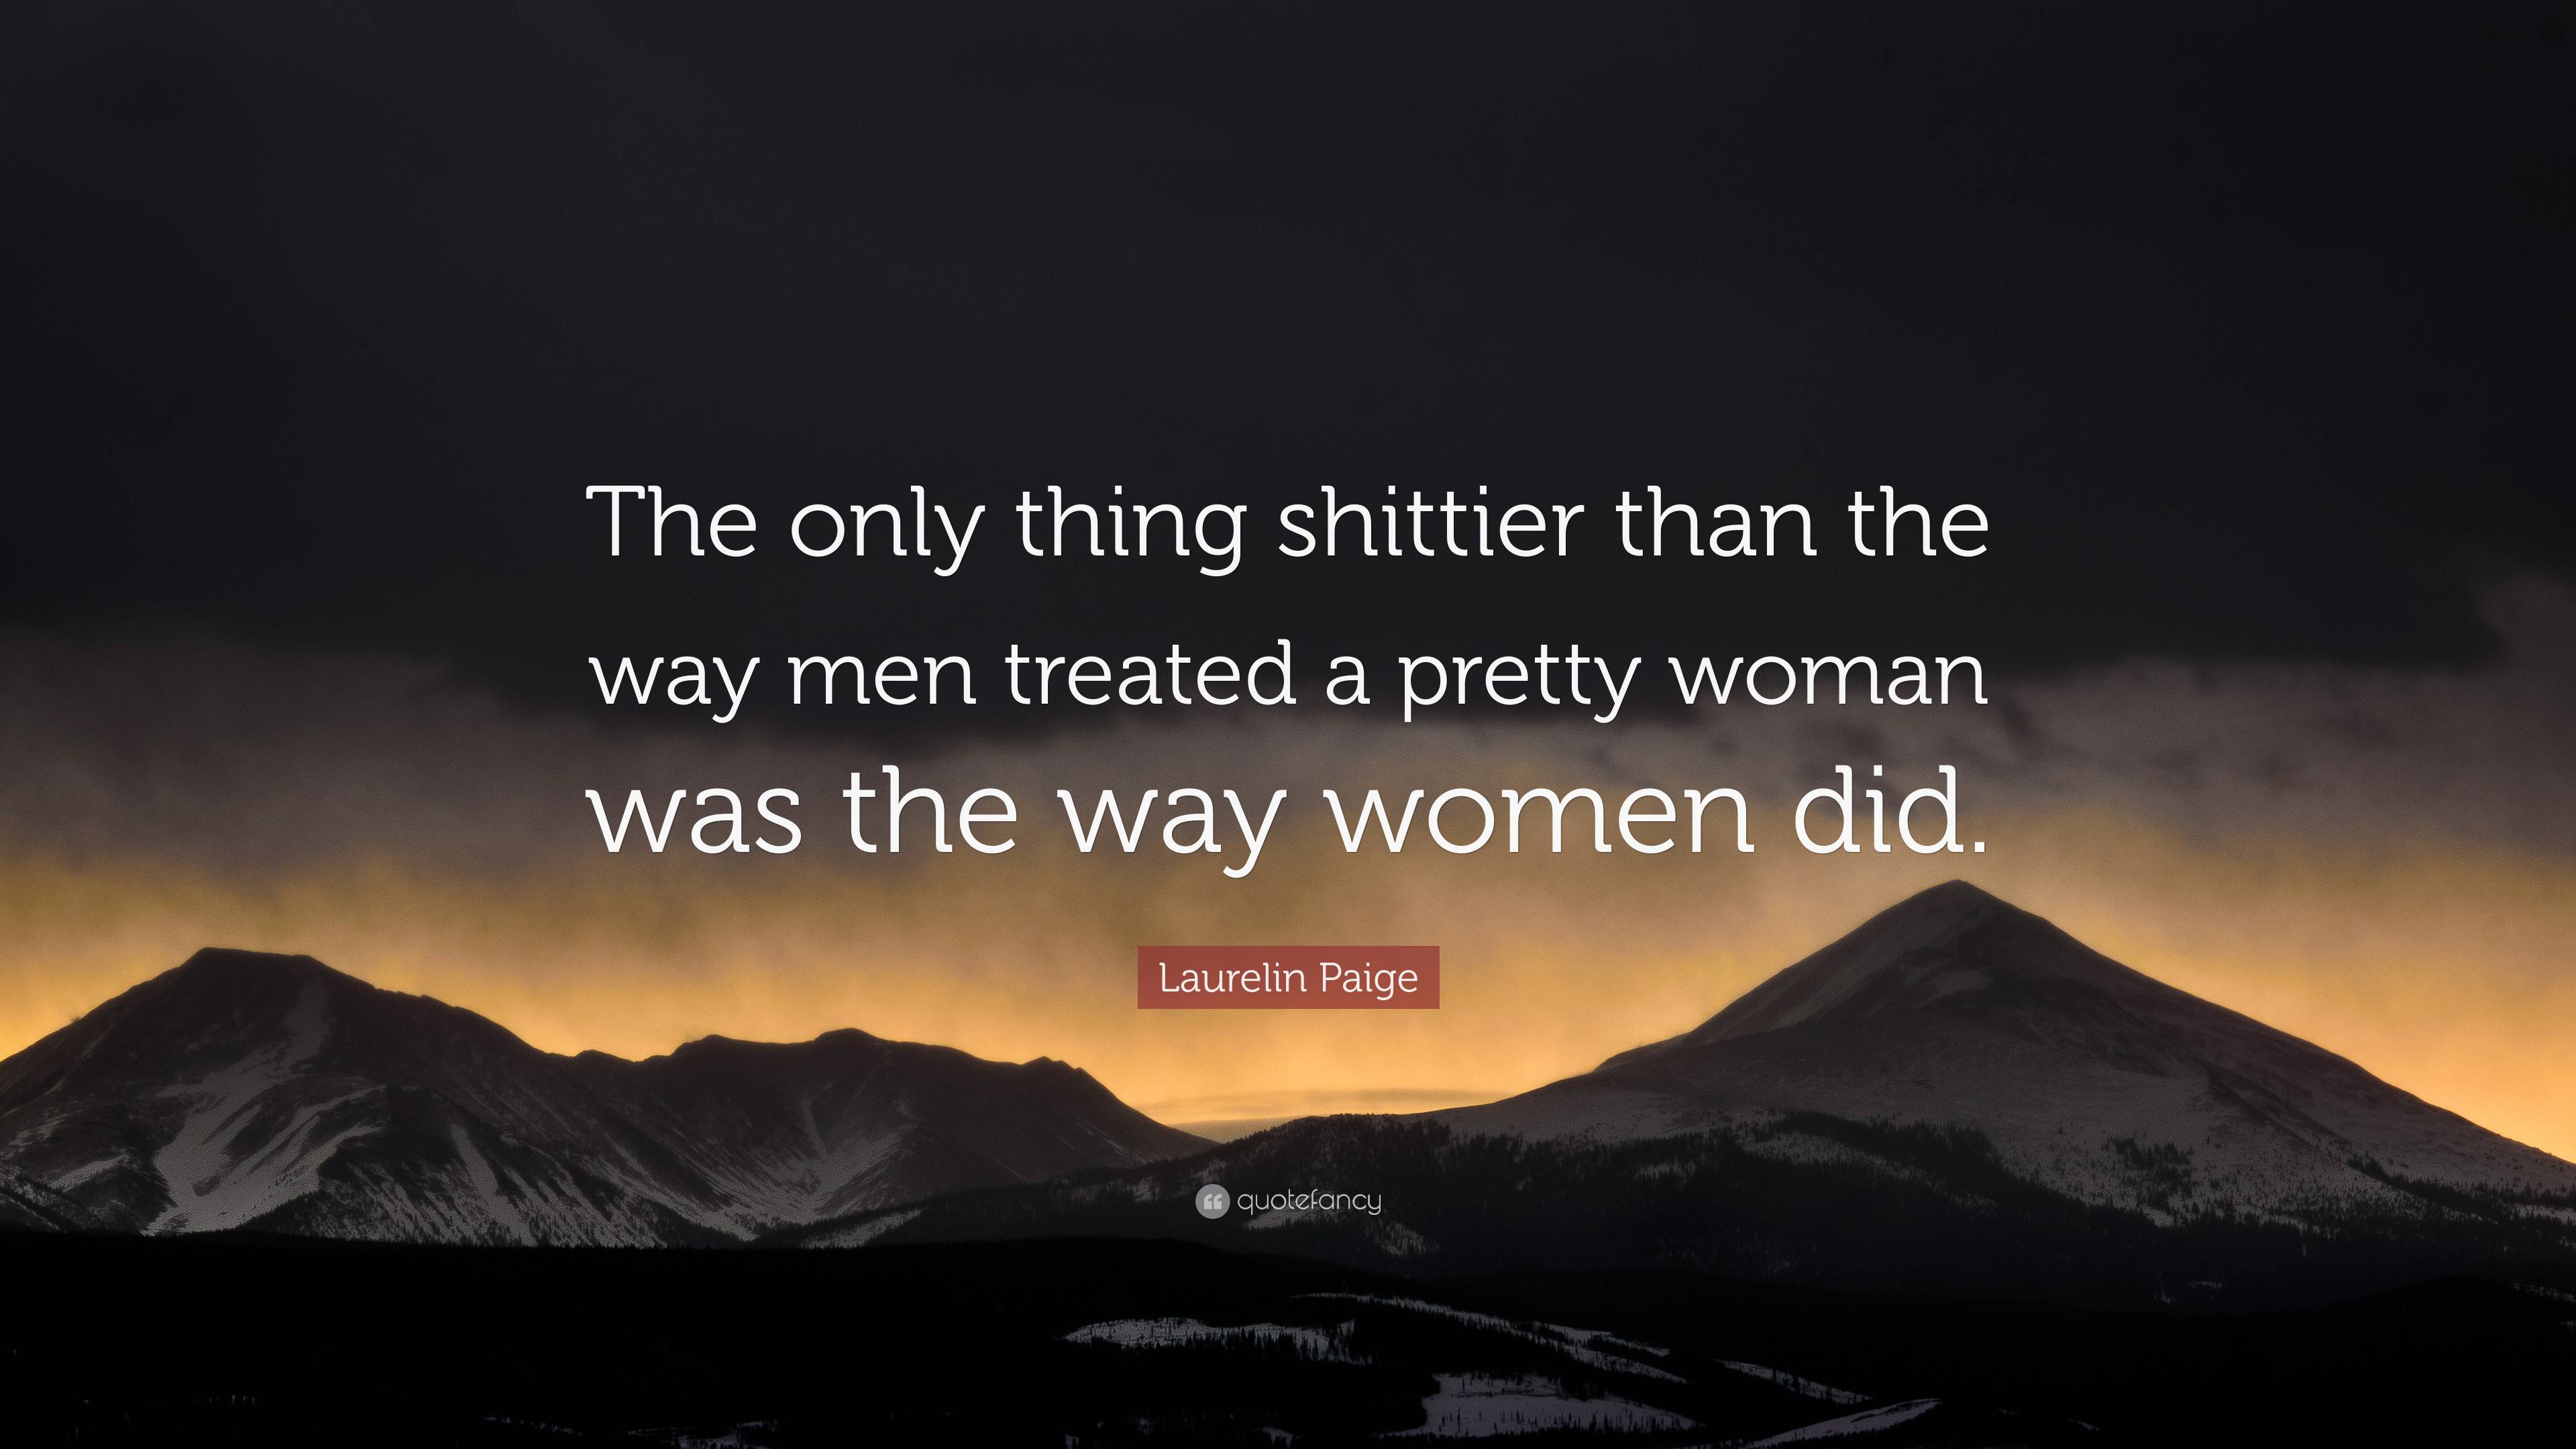 Laurelin Paige Quote: “The only thing shittier than the way men treated ...